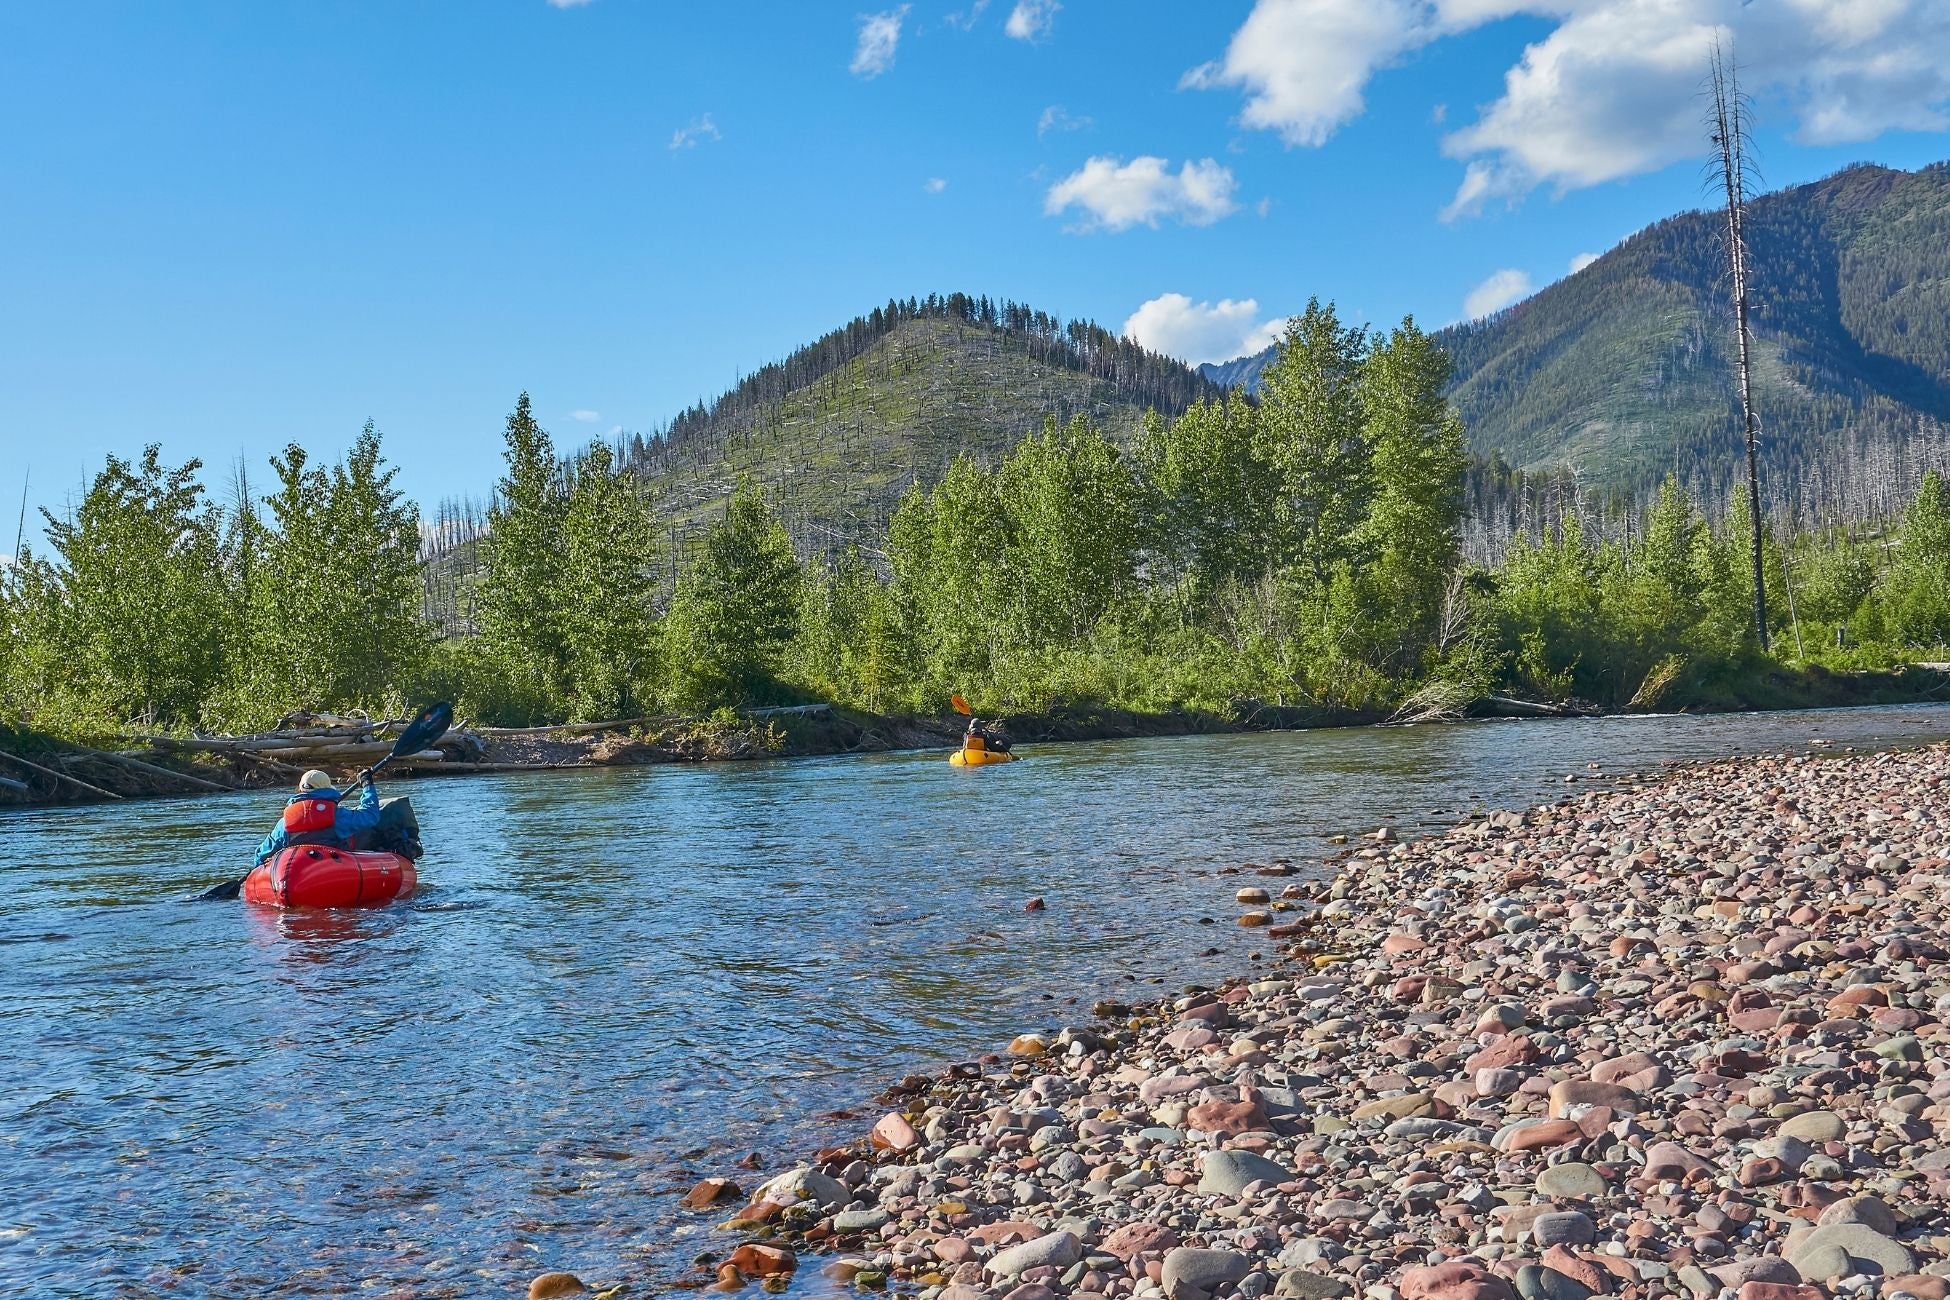 10 tips for a Smooth Packrafting Trip